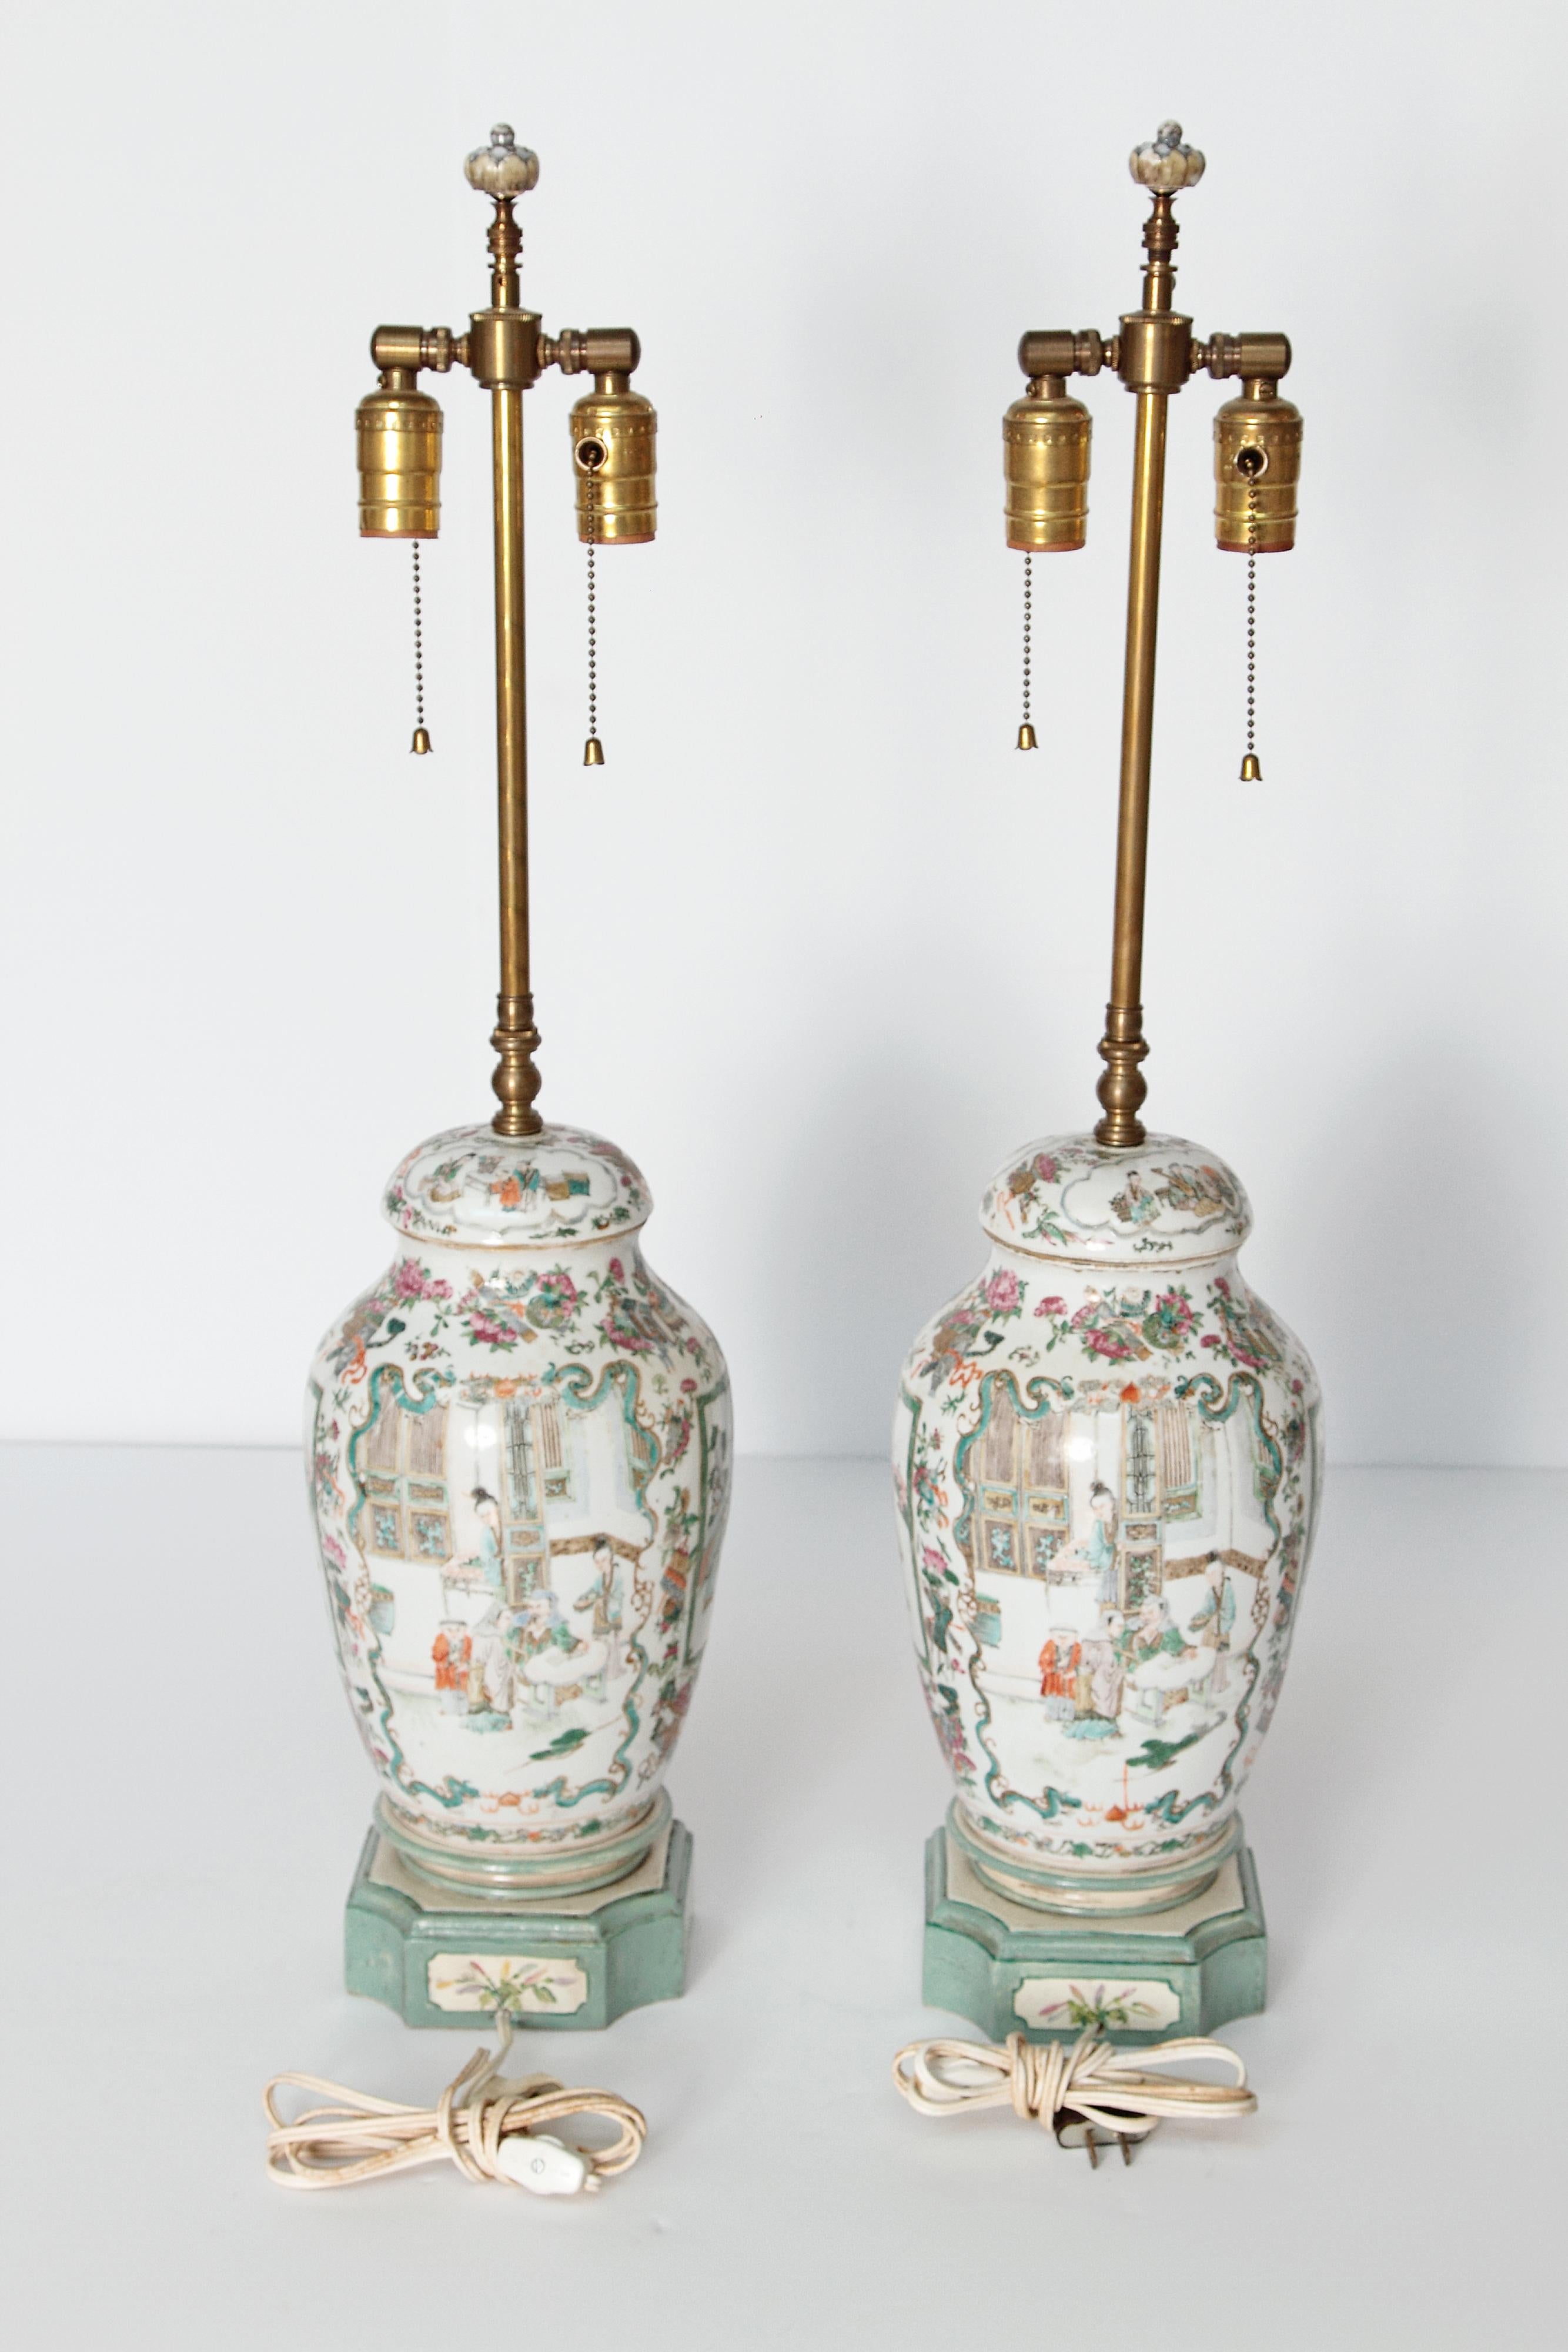 Chinese Export Pair of Early 19th Century Chinese Porcelain Lidded Jars as Lamps